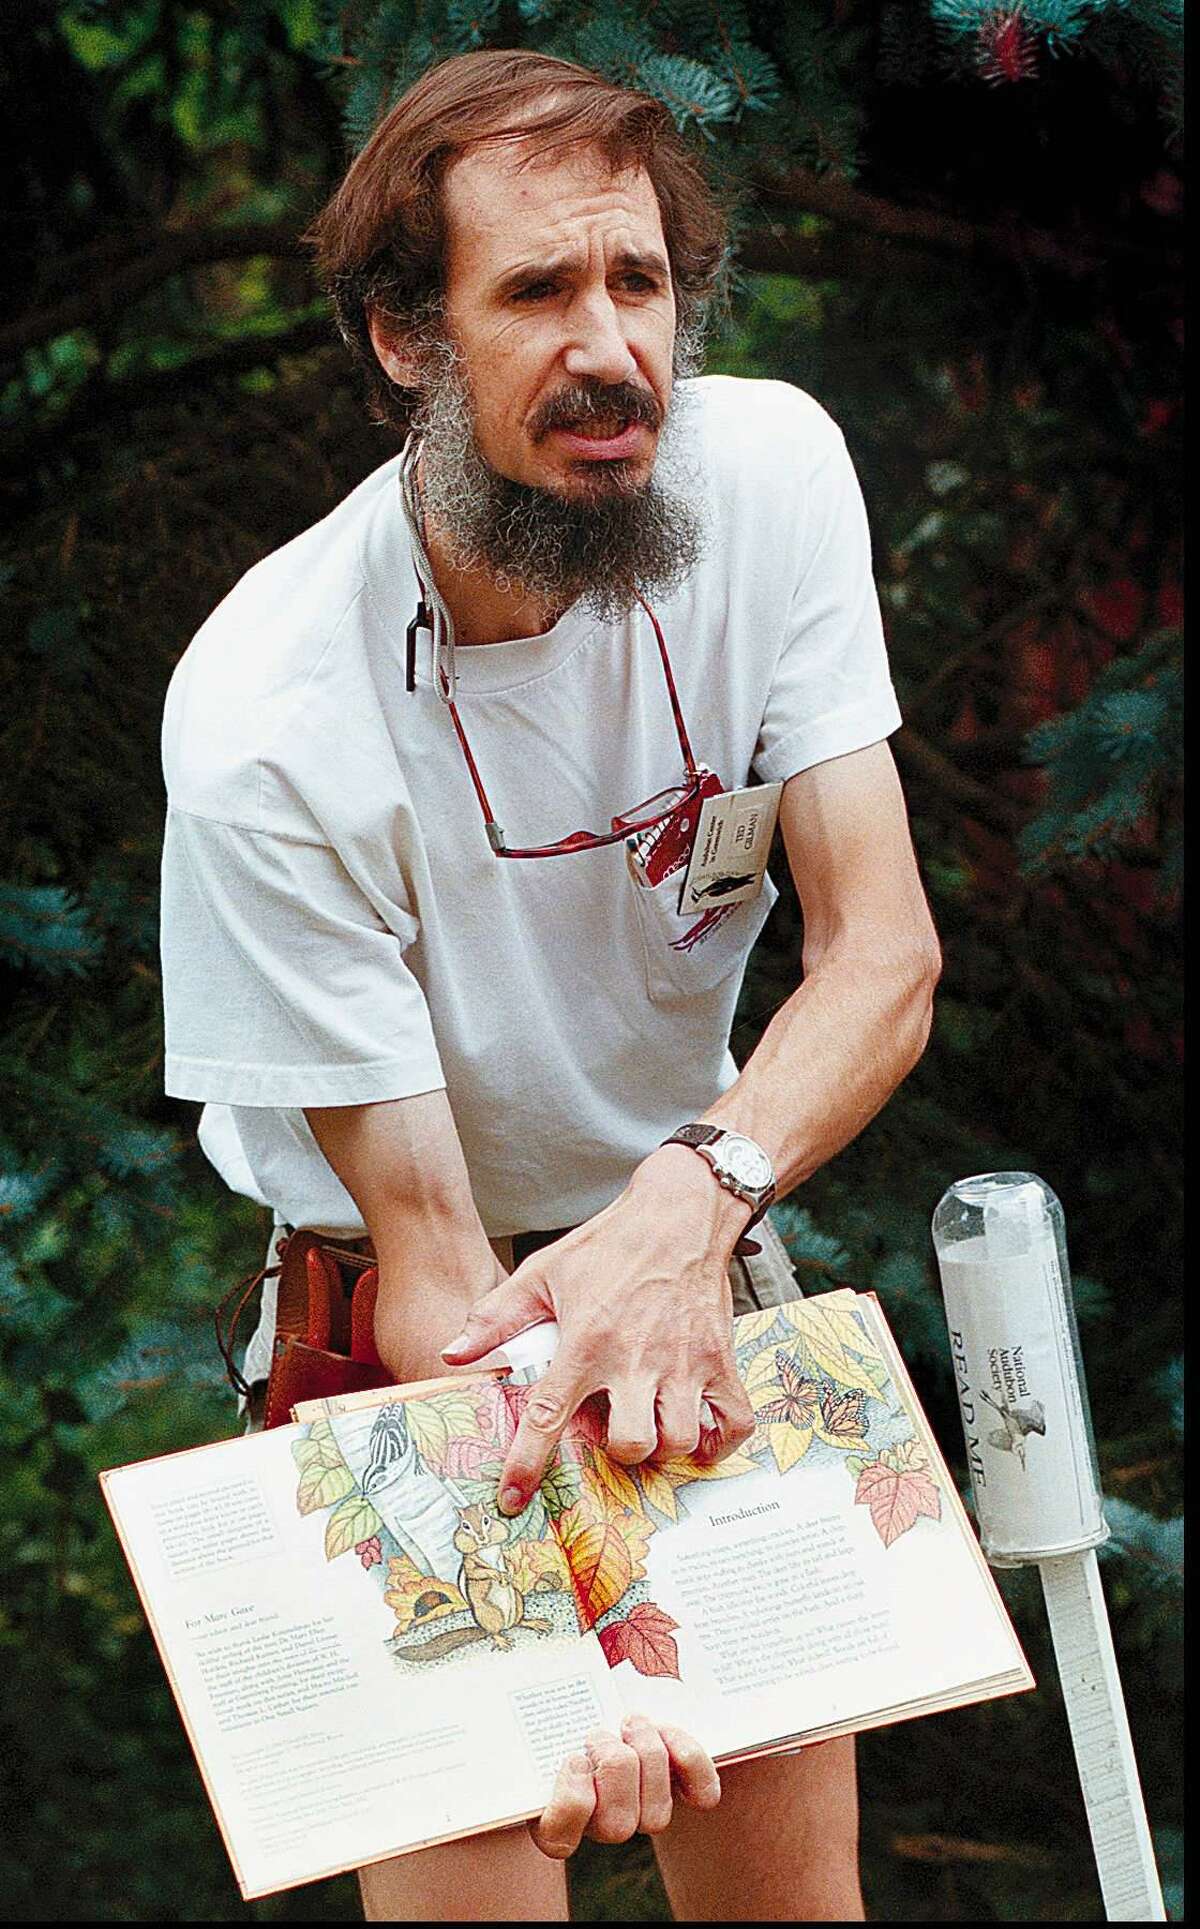 Greenwich. 8/11/98. Enviromental Education Specialist Ted Gilman showing the tour group some of the Animals they might see exploring 'Life on the Forest Floor'. Taken at Greenwich Audubon. Photo/ Mark Conrad COLOR